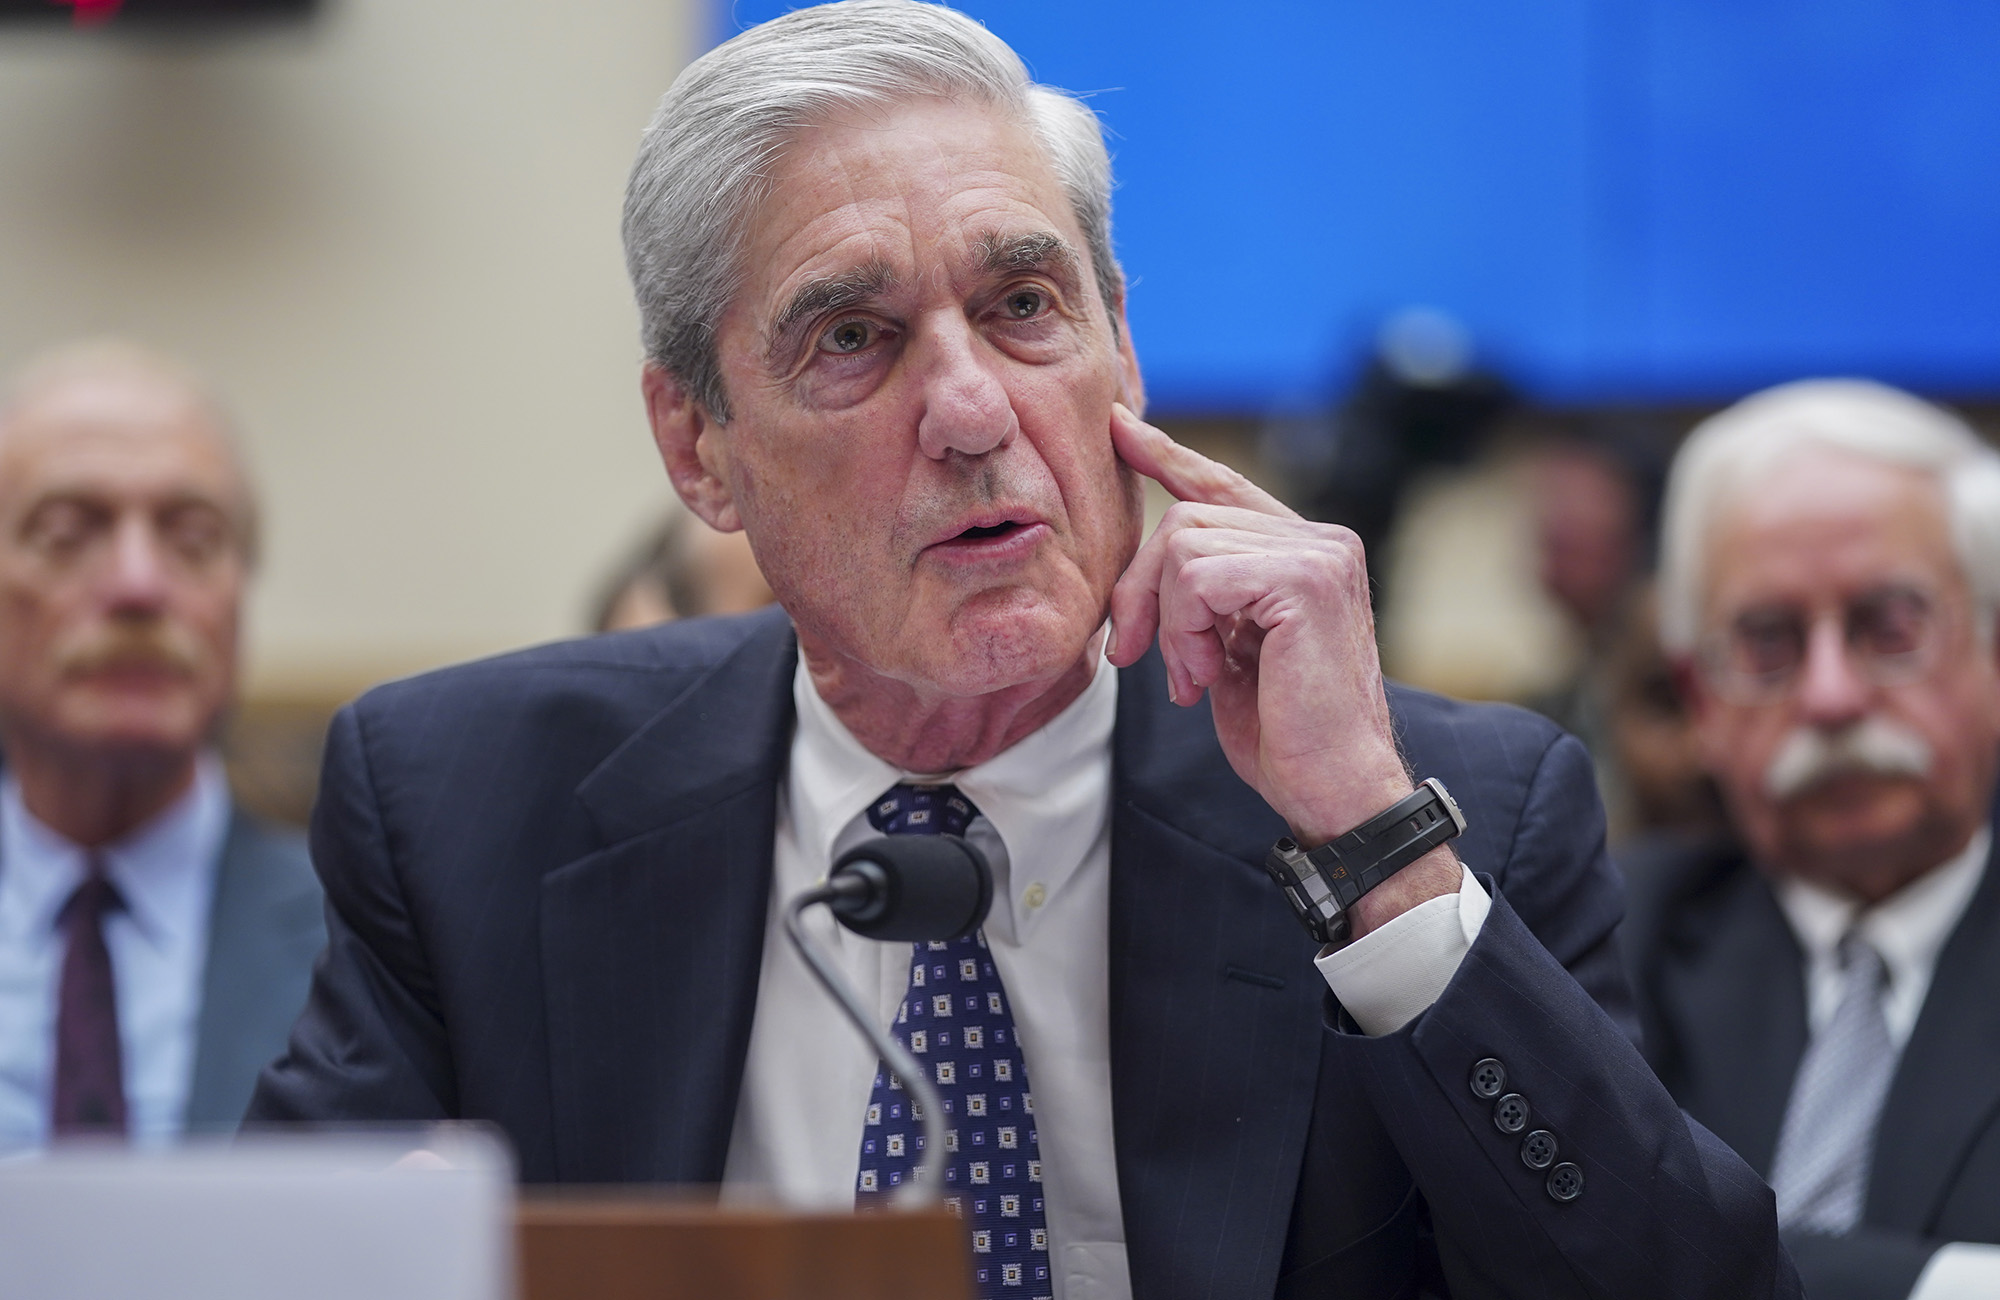 Mueller reportedly knew that the RussiaGate claims were baseless.